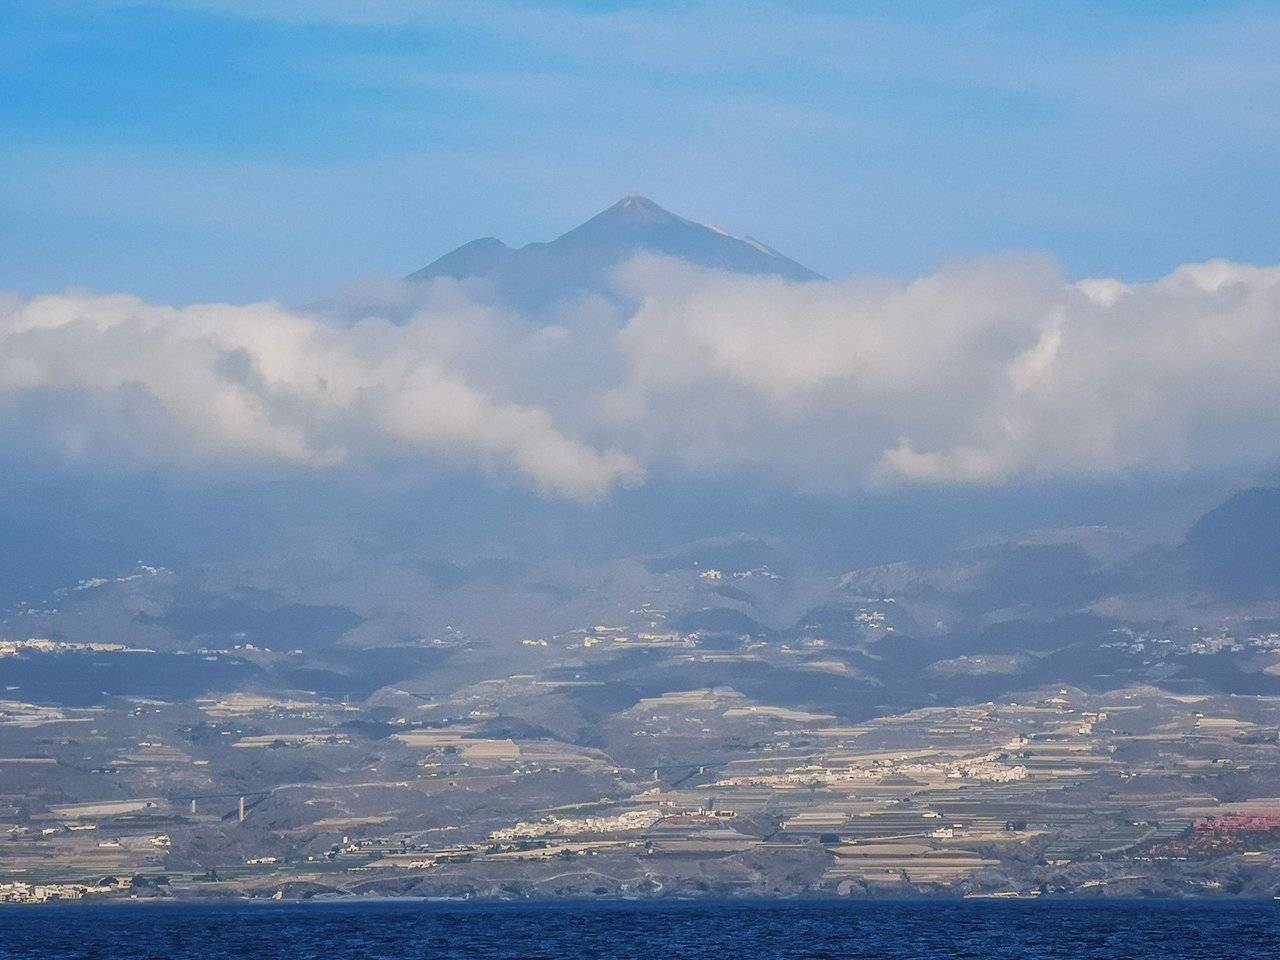   It is a popular challenge to climb Mount Teide from the sea level. Photo by Alis Monte [CC BY-SA 4.0], via Connecting the Dots